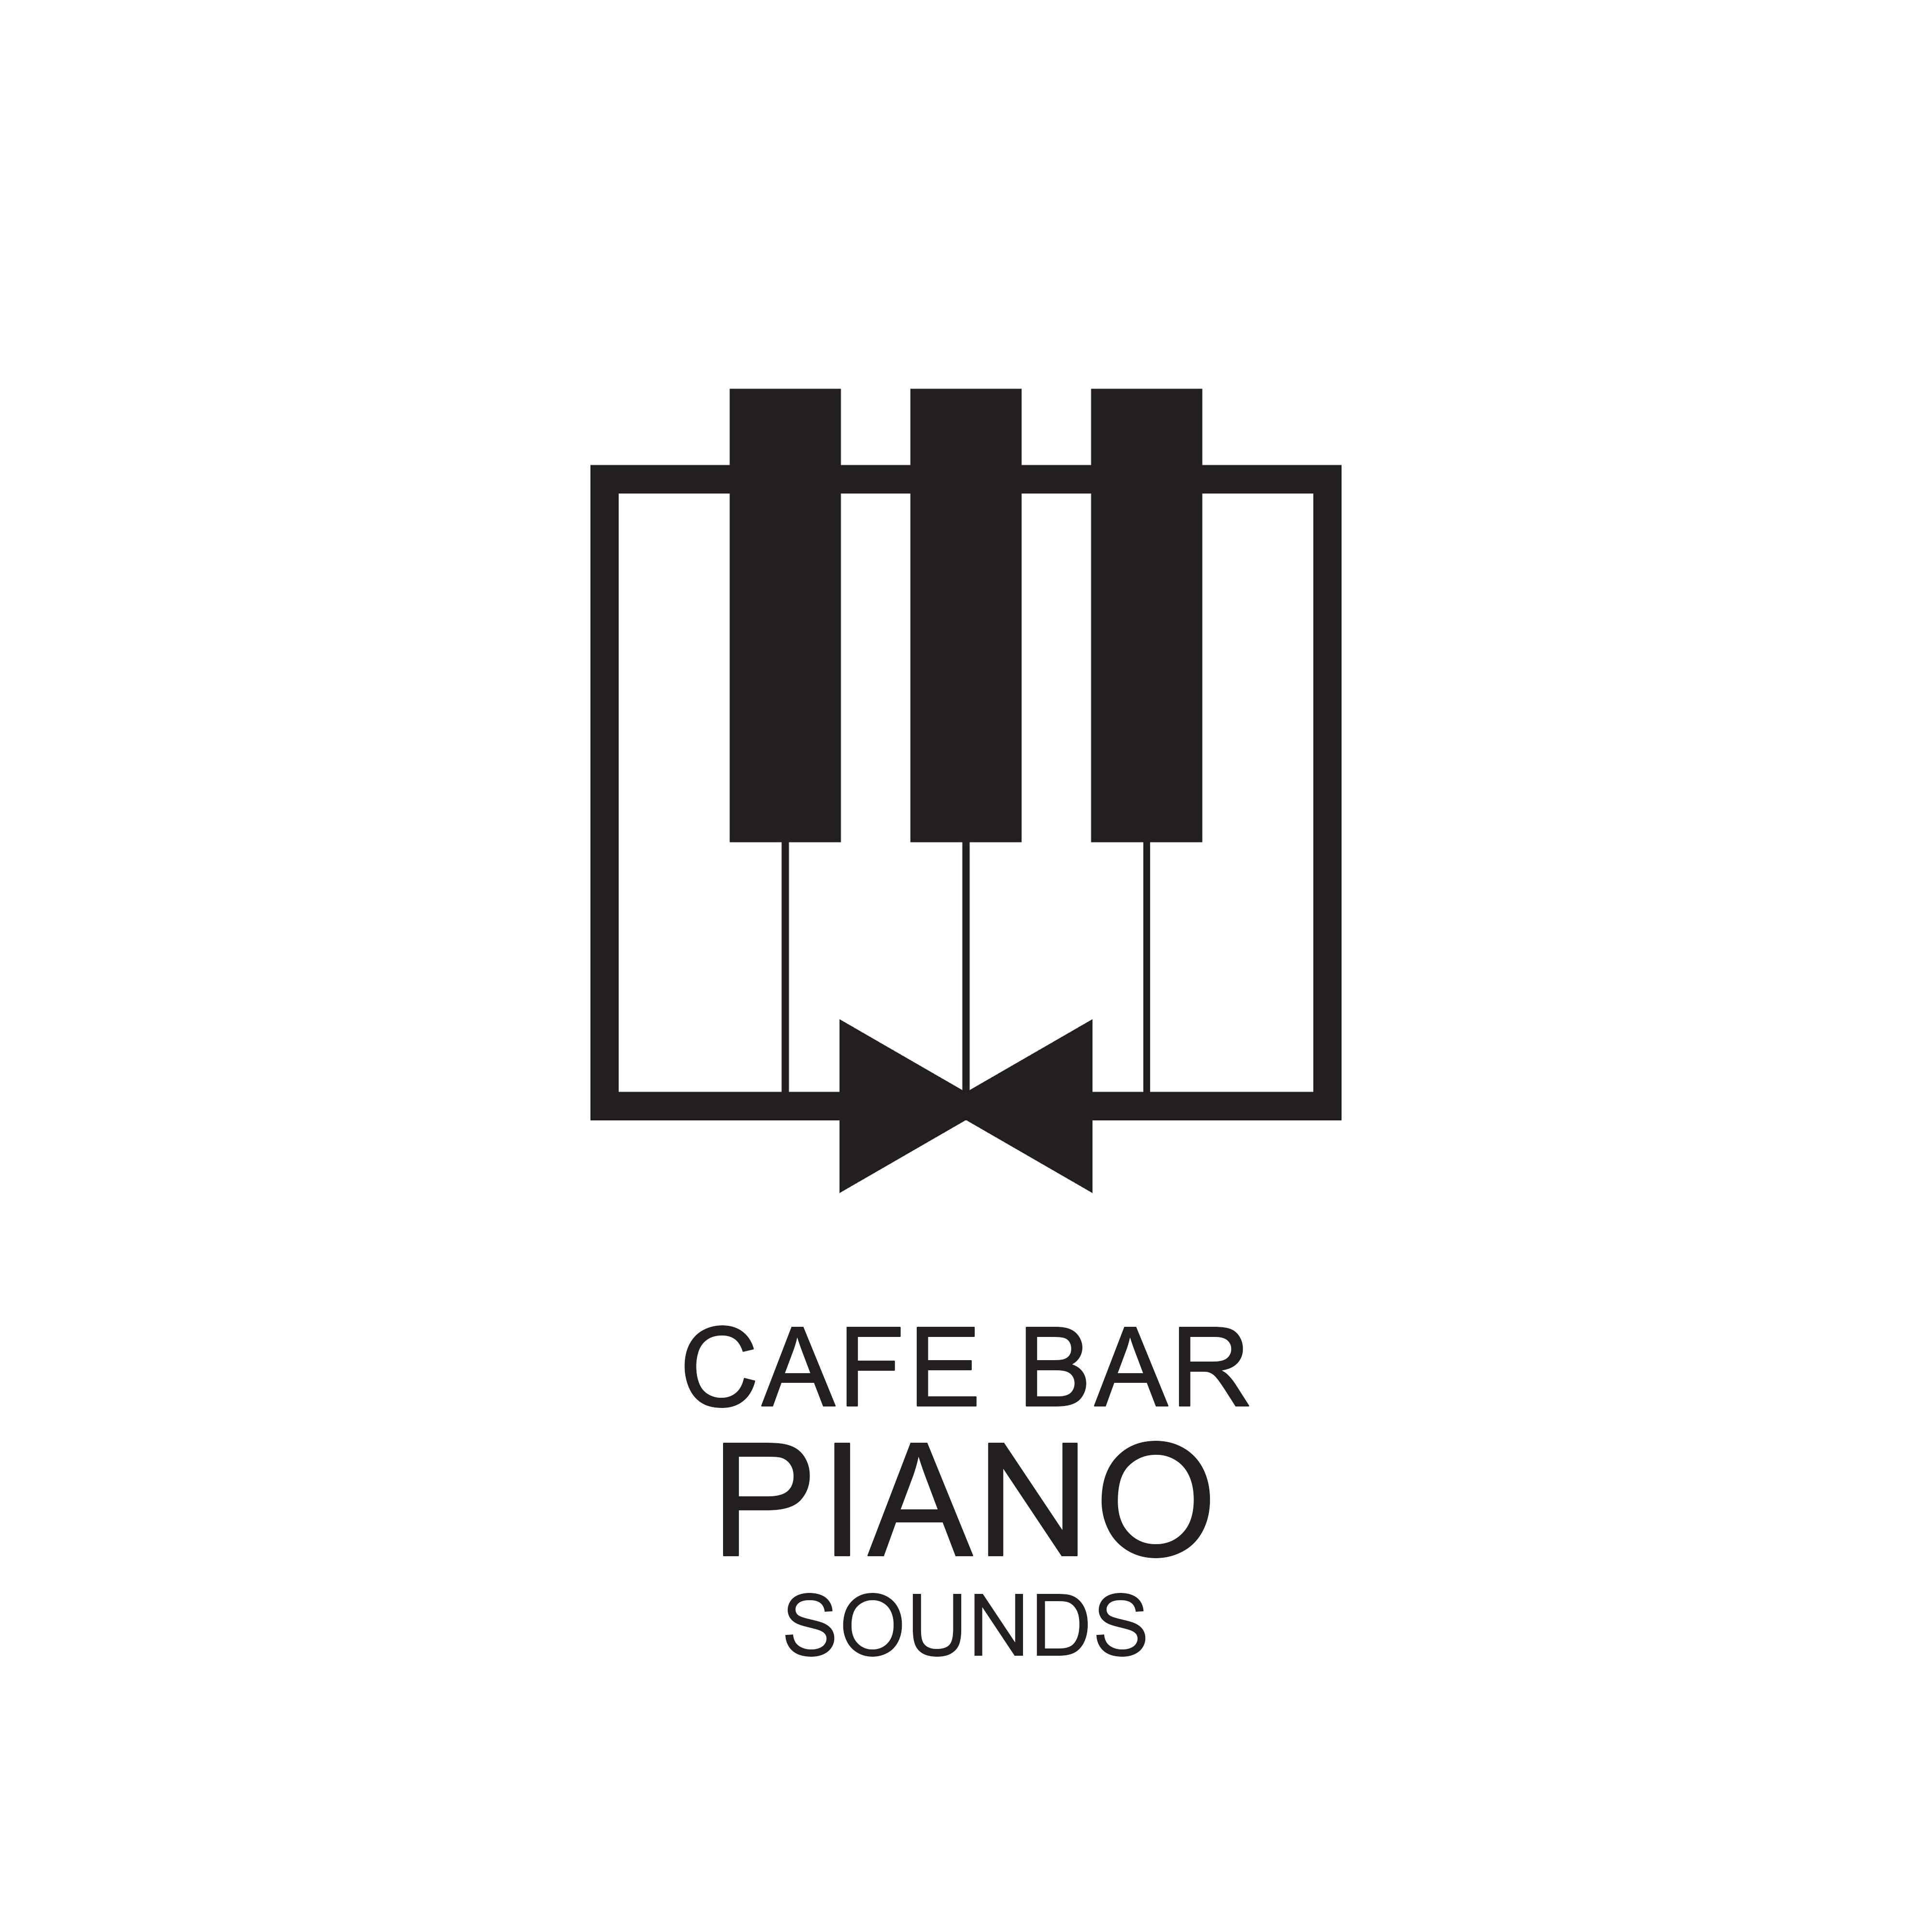 Cafe Bar Piano Sounds  Smooth Jazz Best 2019 Music, Unique Sounds of Piano, Guitar, Sax  Other Instruments, Top Background Songs for Cafe